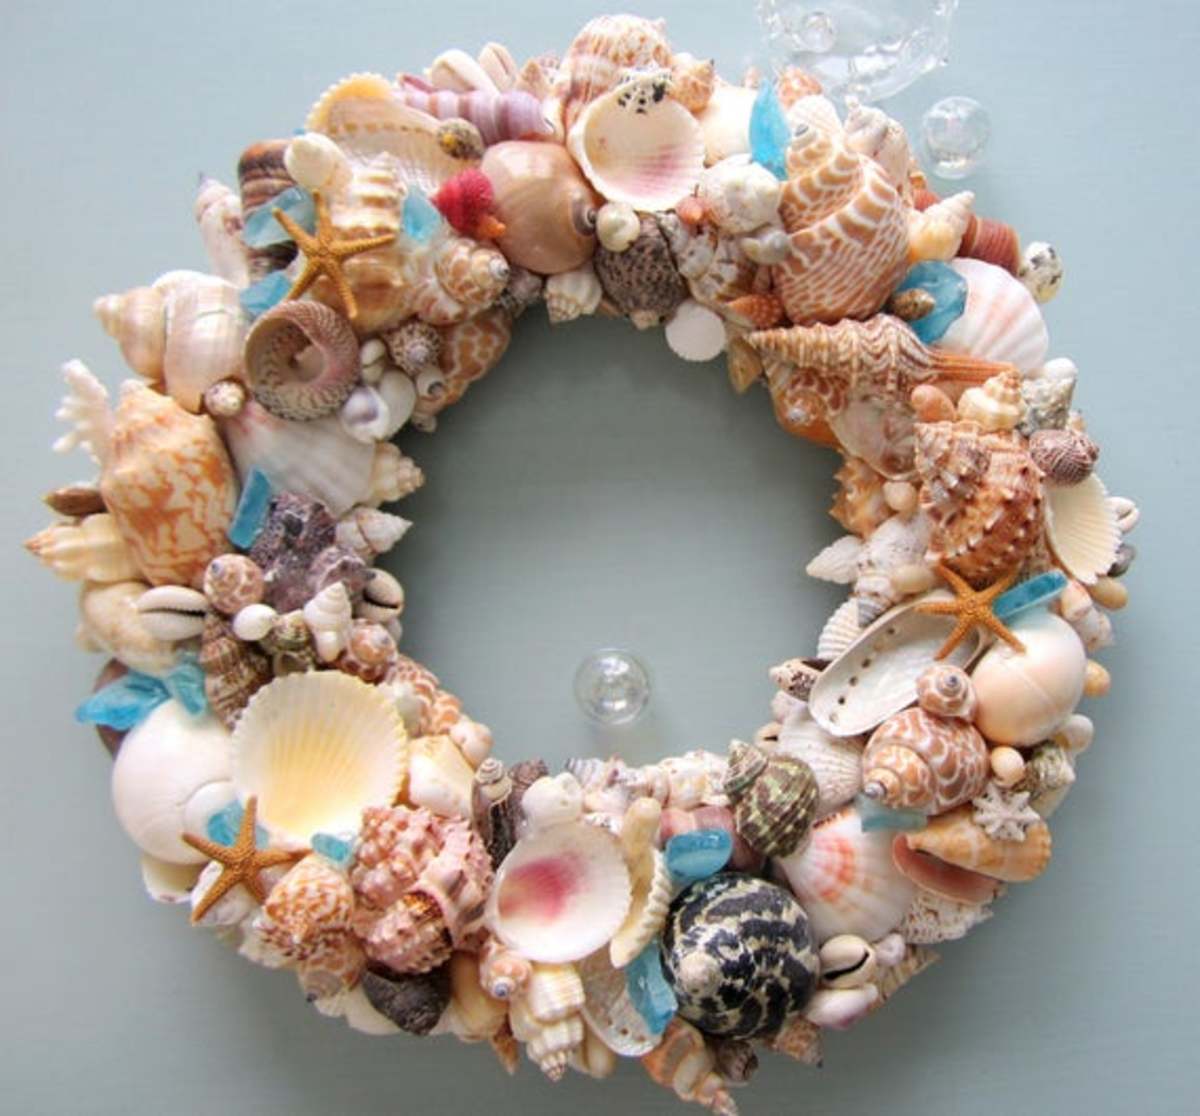 Choose a variety of shells for a full wreath: Your wreath can be as full or as simple as you want it to be.